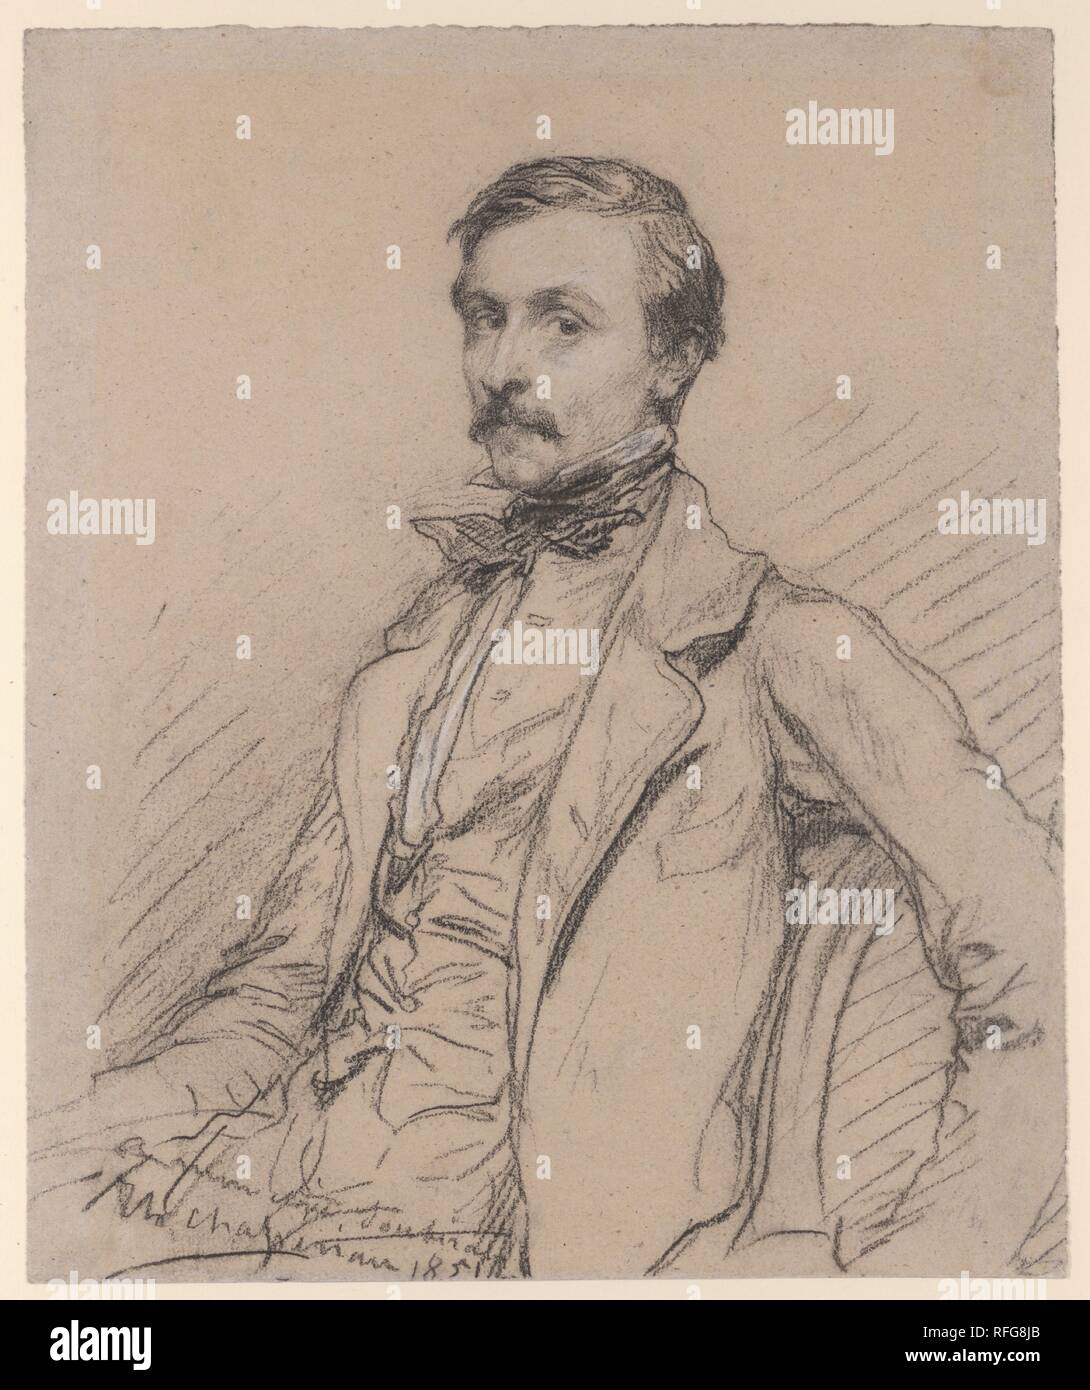 Ernest Chassériau (?). Artist: Théodore Chassériau (French, Le Limon, Saint-Domingue, West Indies 1819-1856 Paris). Dimensions: Sheet: 9 3/8 x 7 3/4 in. (23.8 x 19.7 cm). Date: 1851.  The sitter is thought to be the artist's brother, Ernest, an infantry officer in the French navy, who died during the Franco-Prussian War (1870-71). Chassériau's crayon seems to have virtually danced across the sheet, as it marked the contours and creases of Ernest's jacket, waistcoat, and tie. The sitter's penetrating gaze and refined features are treated with a tenderness befitting a beloved brother. Museum: Me Stock Photo